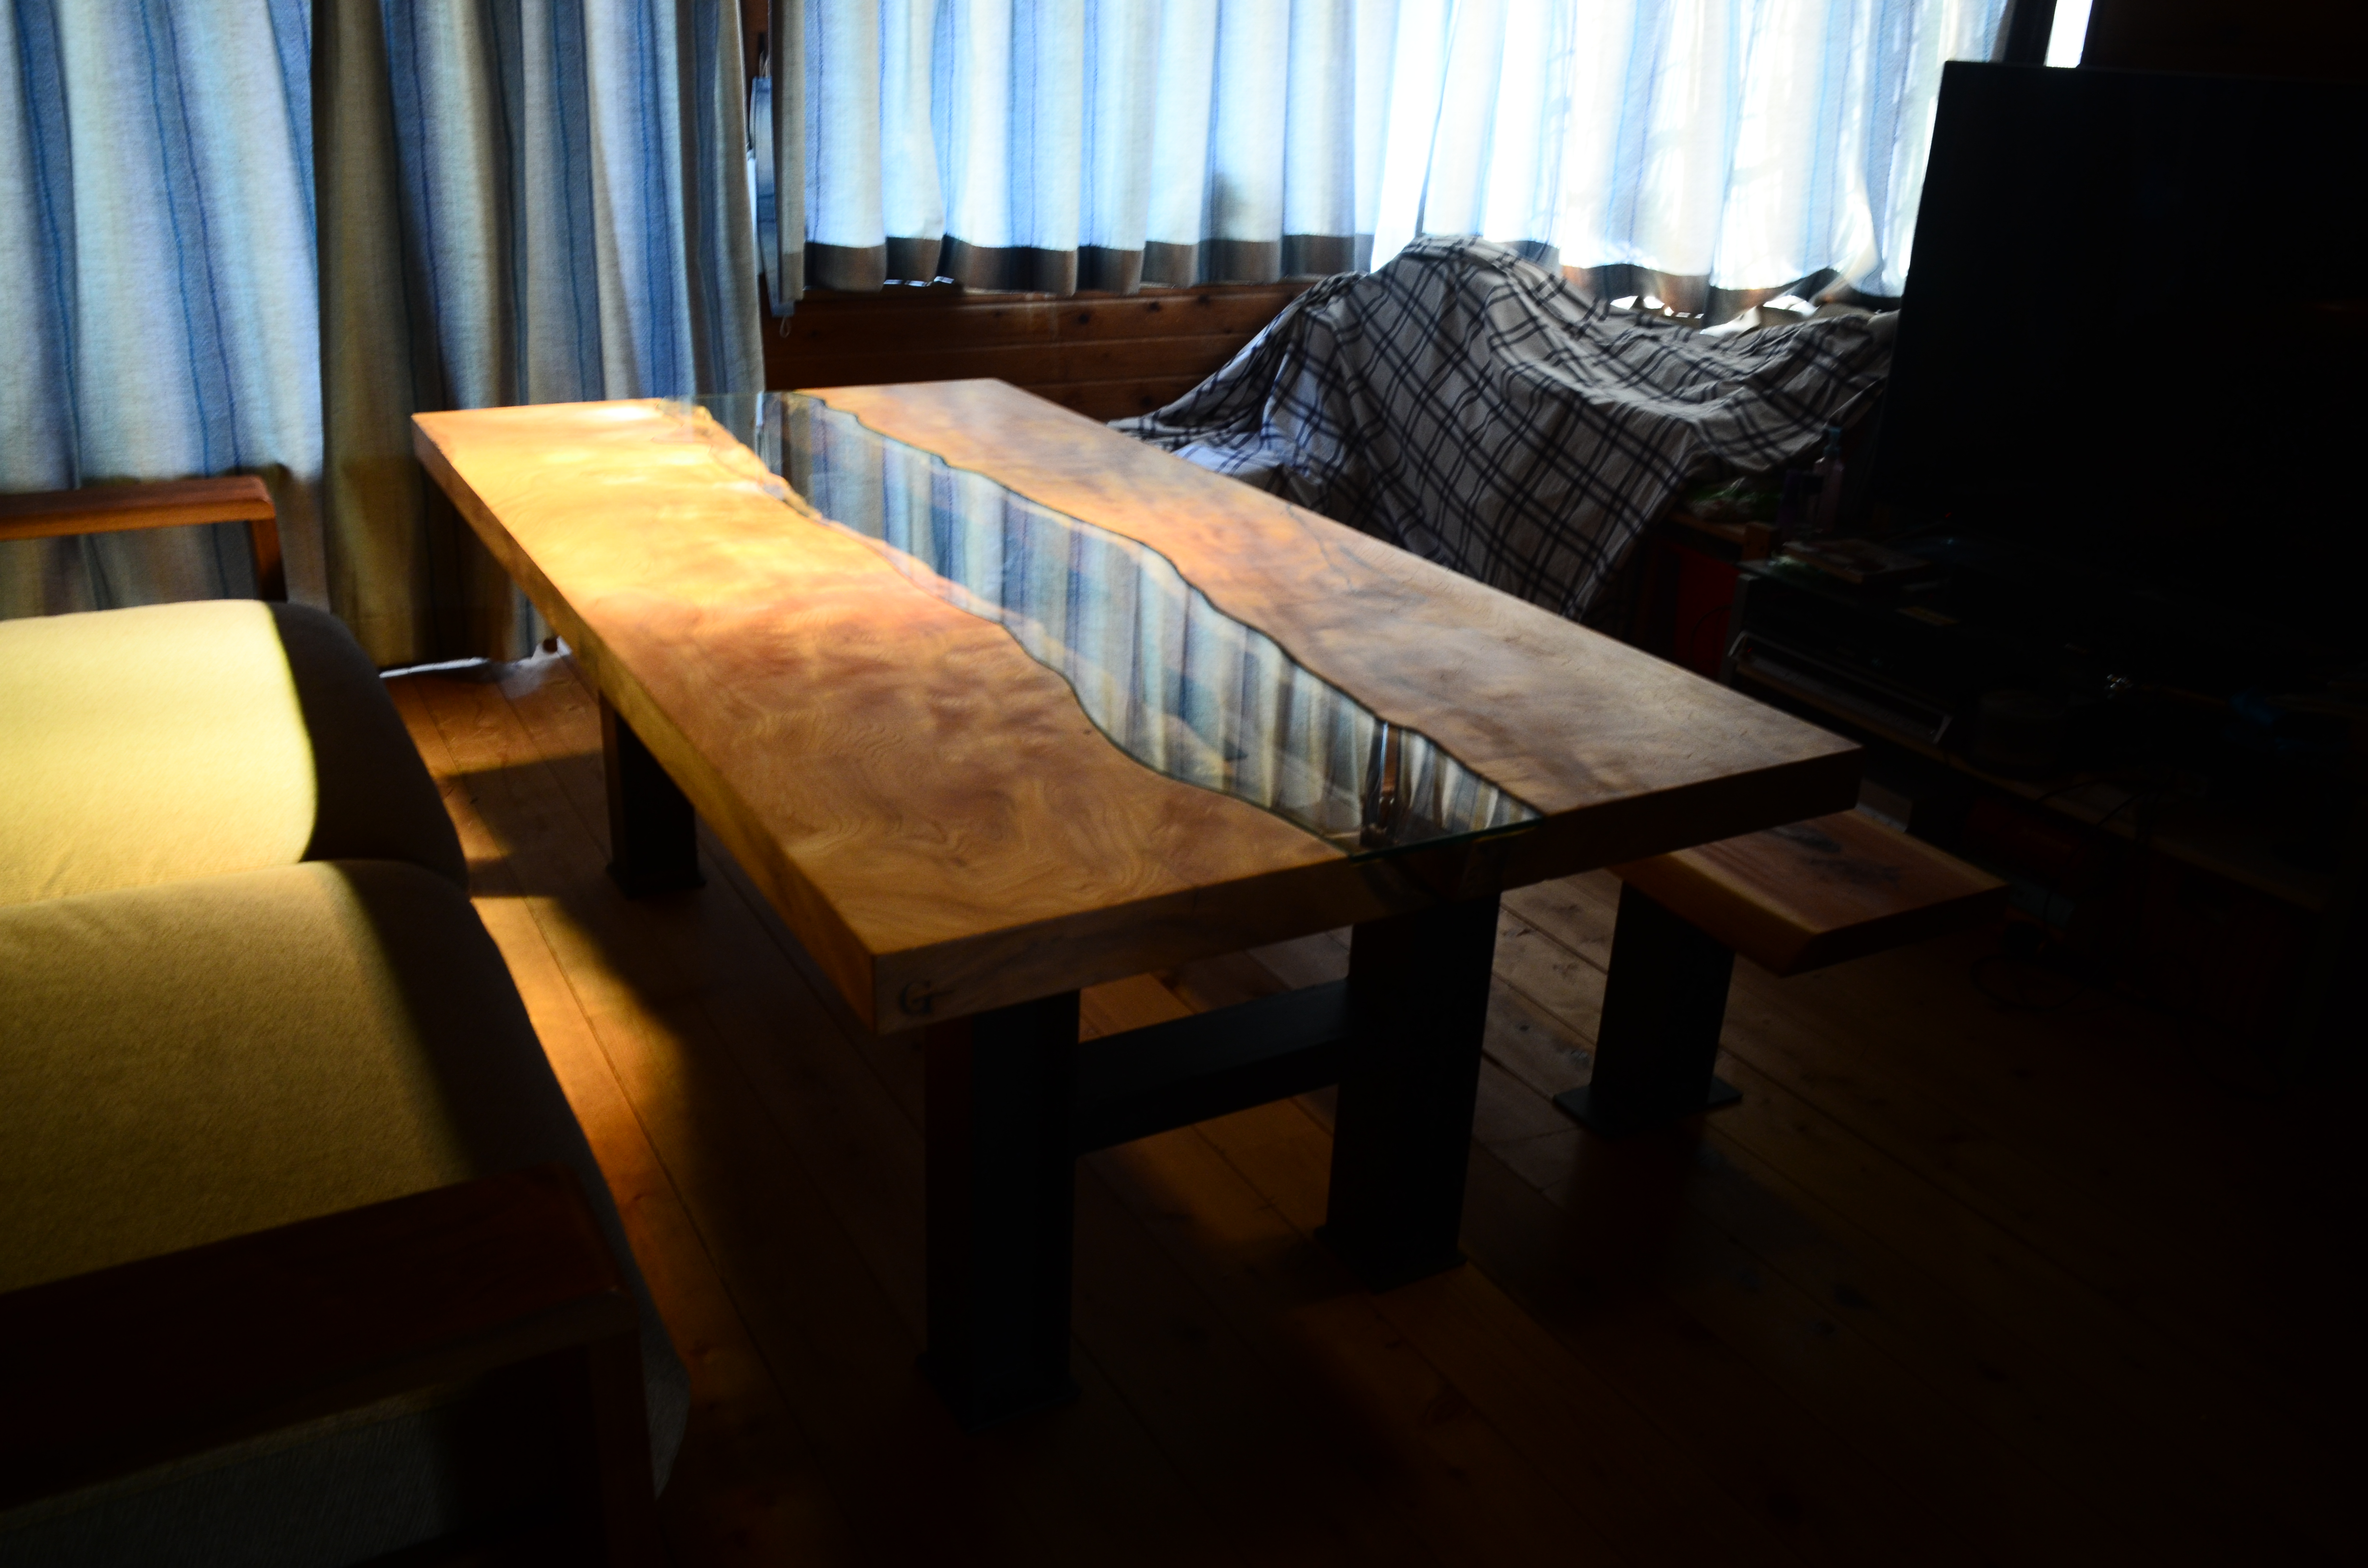 River table#1 完成